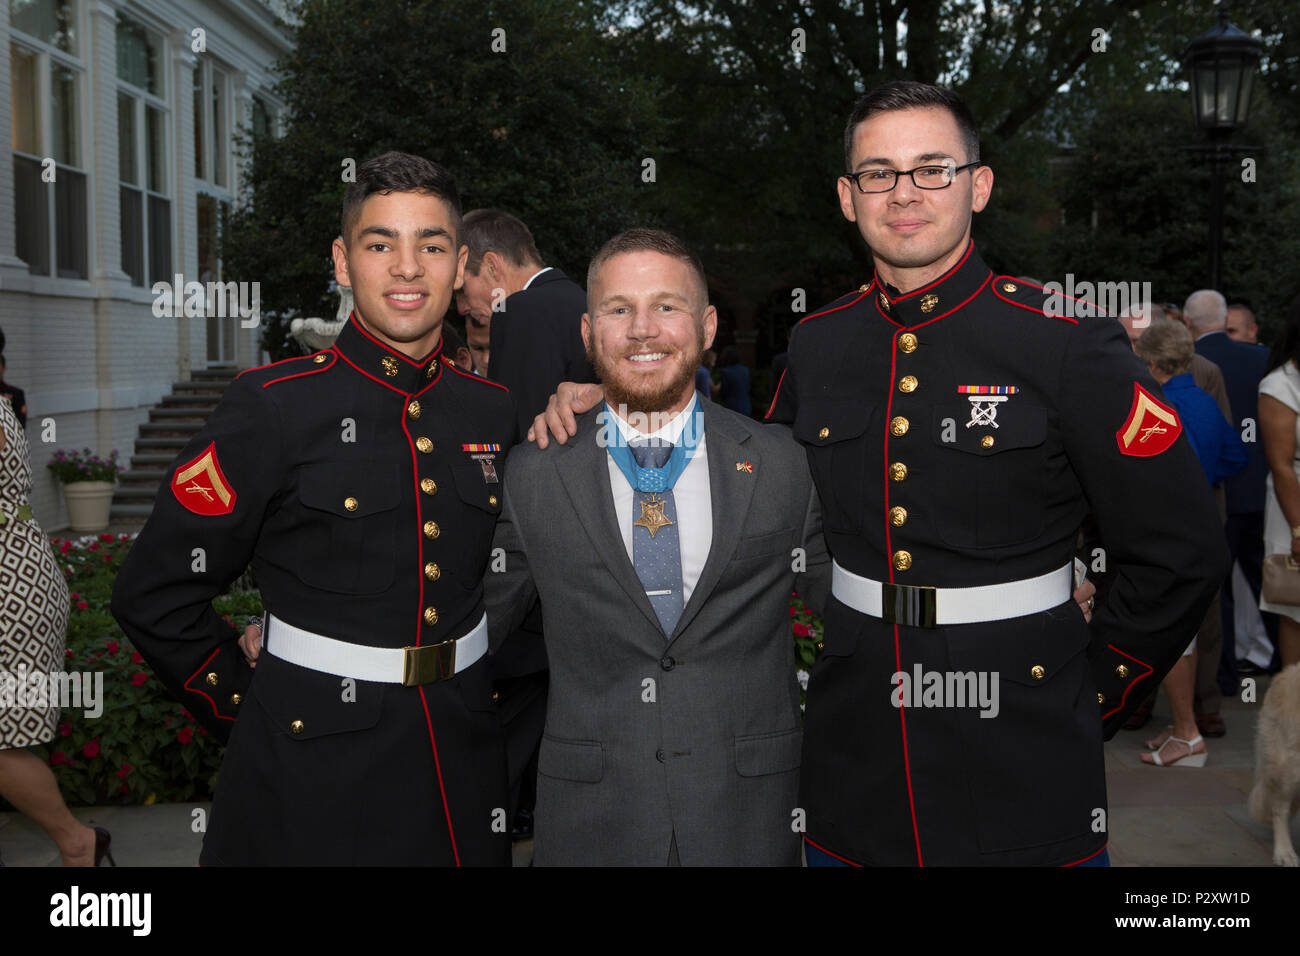 Retired U.S. Marine Corps Cpl. William Kyle Carpenter, Medal of Honor recipient, poses for a photo with Lance Cpl. Bryce Alvarez, right, and Lance Cpl Alex Gonzolez, left, Headquarters and Service Battallion, Marine Corps Base Henderson Hall, during the evening parade reception in the Marine Family Garden, Marine Barracks Washington, Washington, D.C., Aug. 5, 2016. Evening parades are held as a means of honoring senior officials, distinguished citizens and supporters of the Marine Corps. (U.S. Marine Corps photo by Cpl. Christian J. Varney) Stock Photo